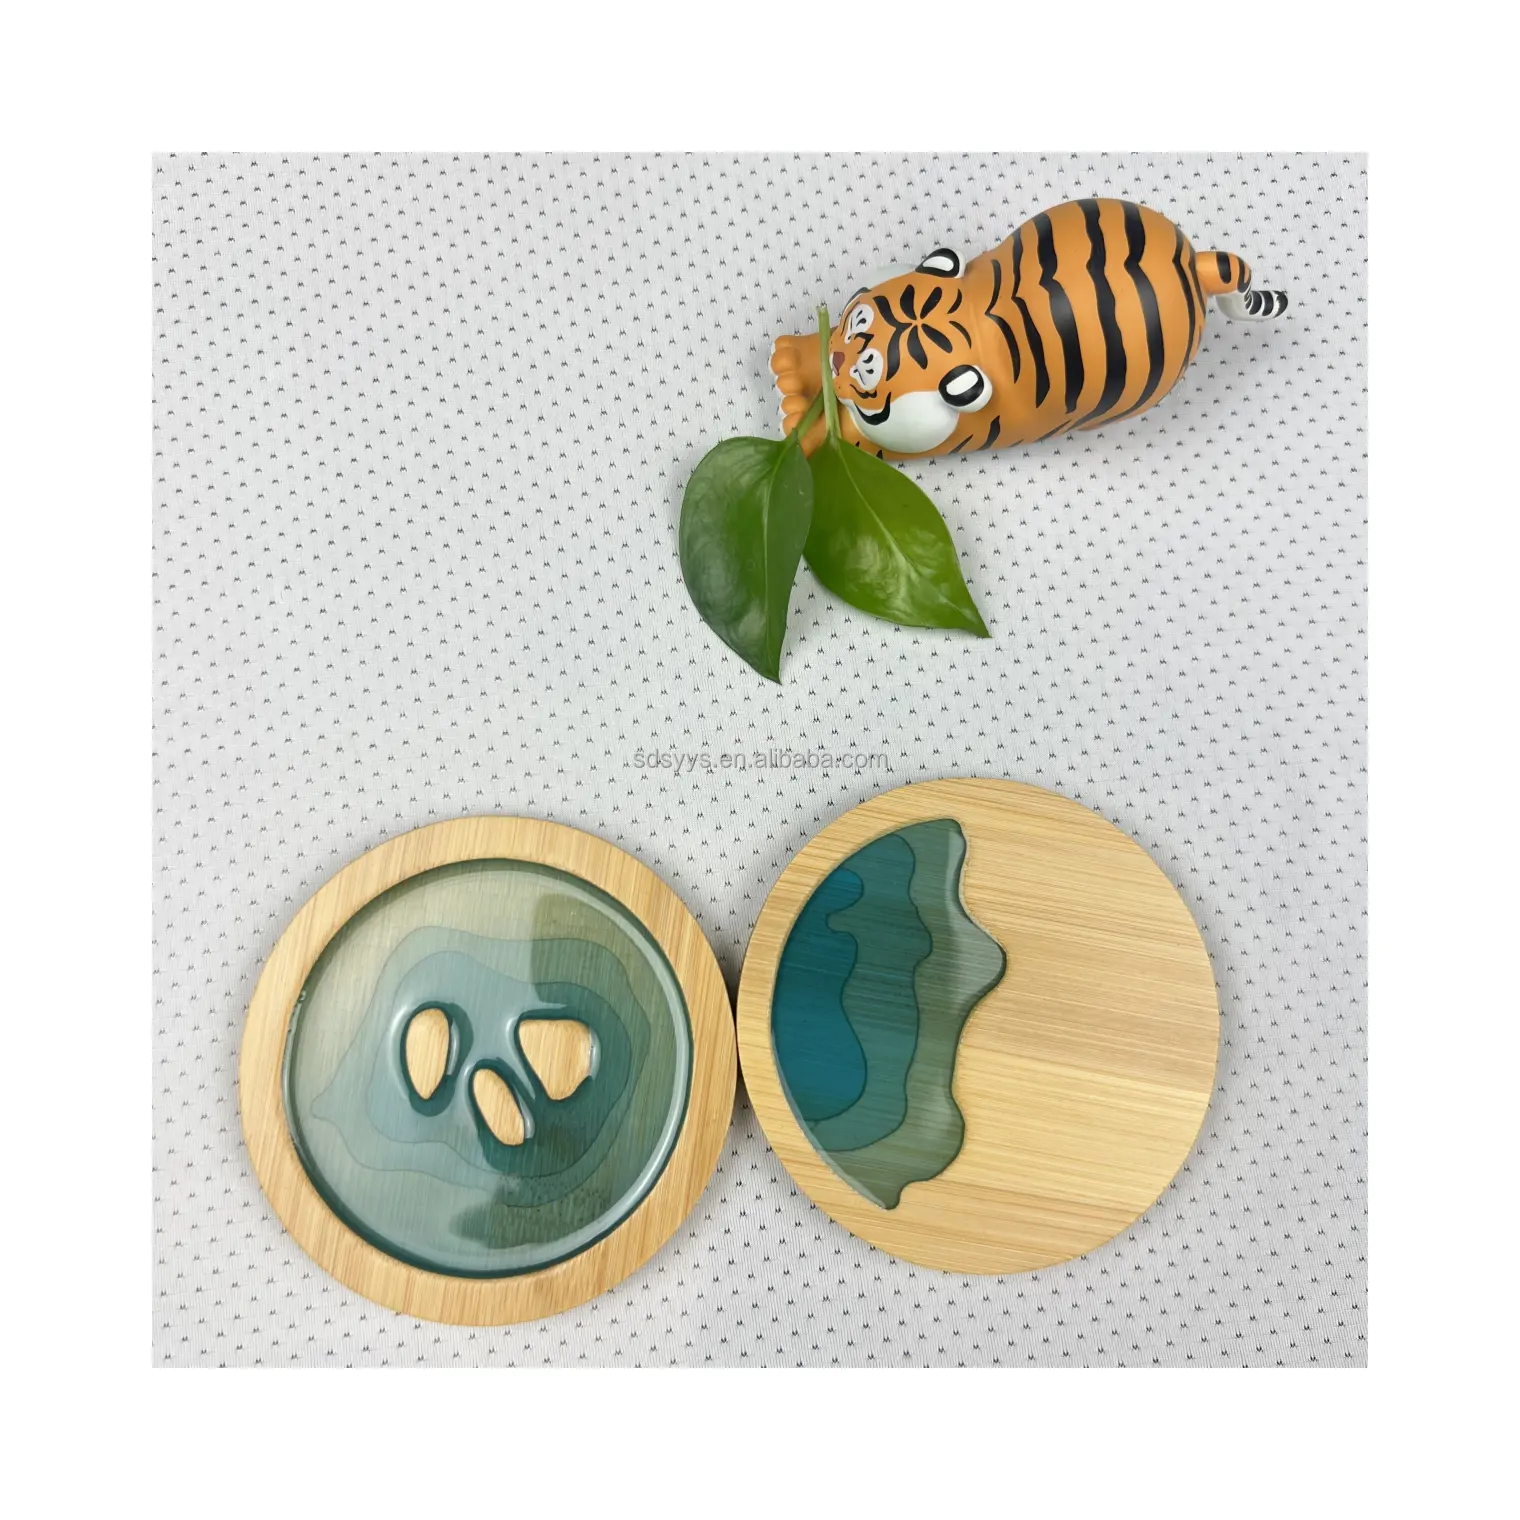 Sustainable eco friendly products bamboo eco resin Sea beach wooden coasters for drinks for bar kitchen home apartment